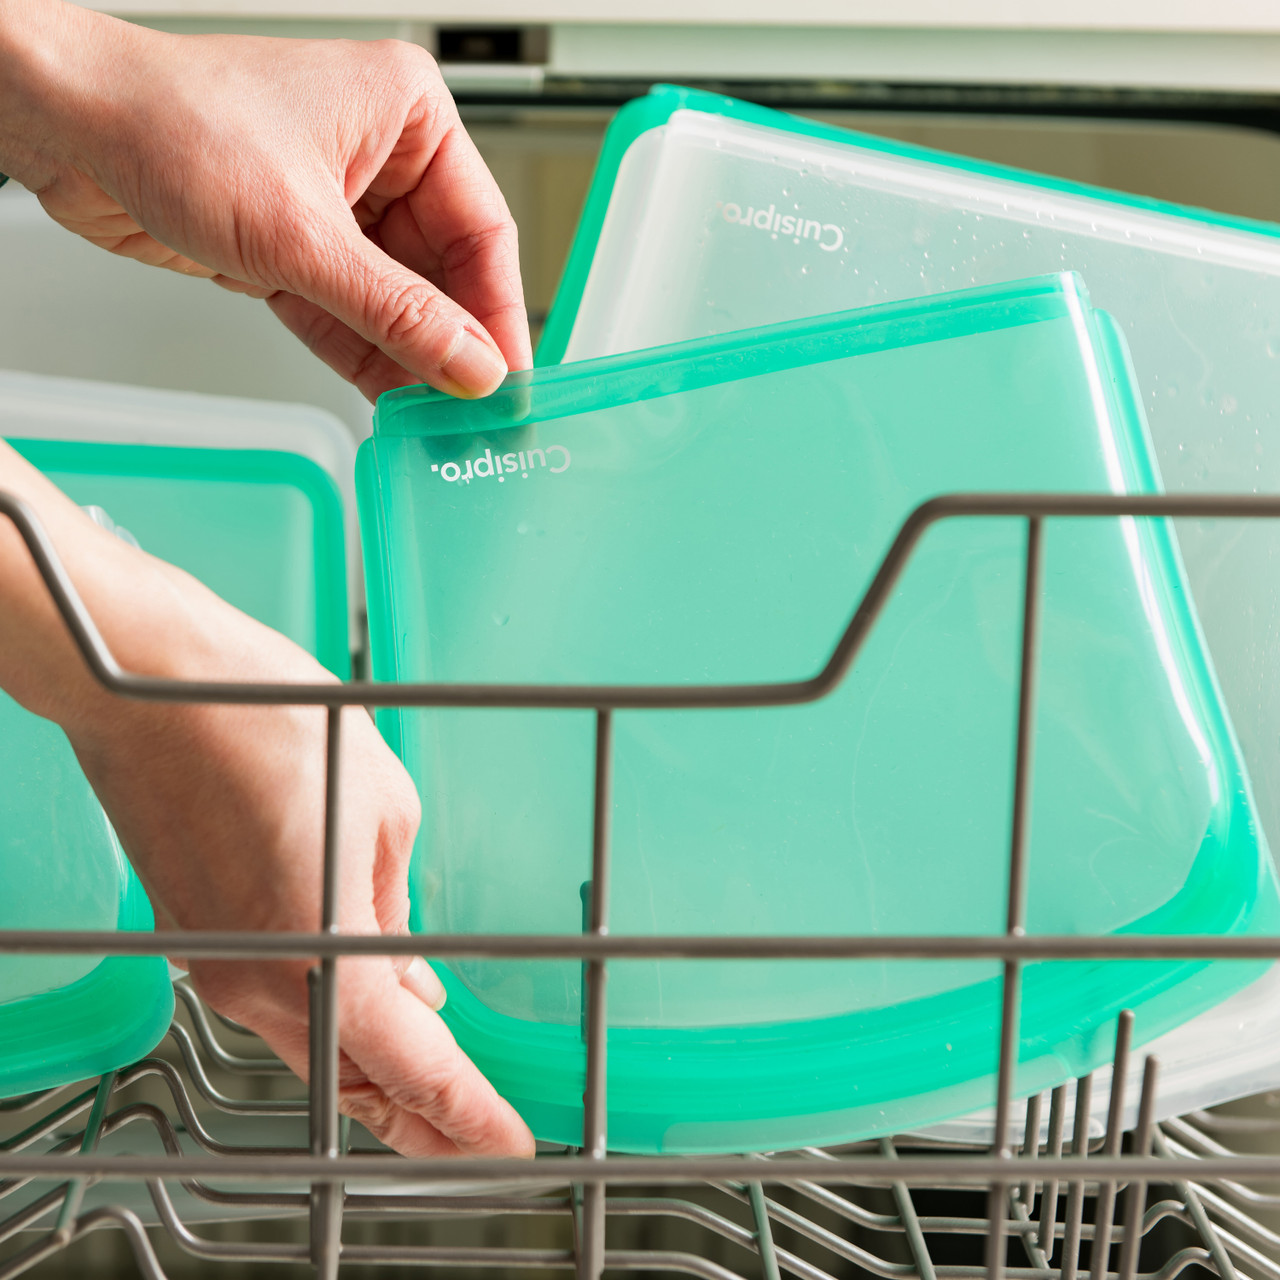 Easy to clean - Dishwasher Safe